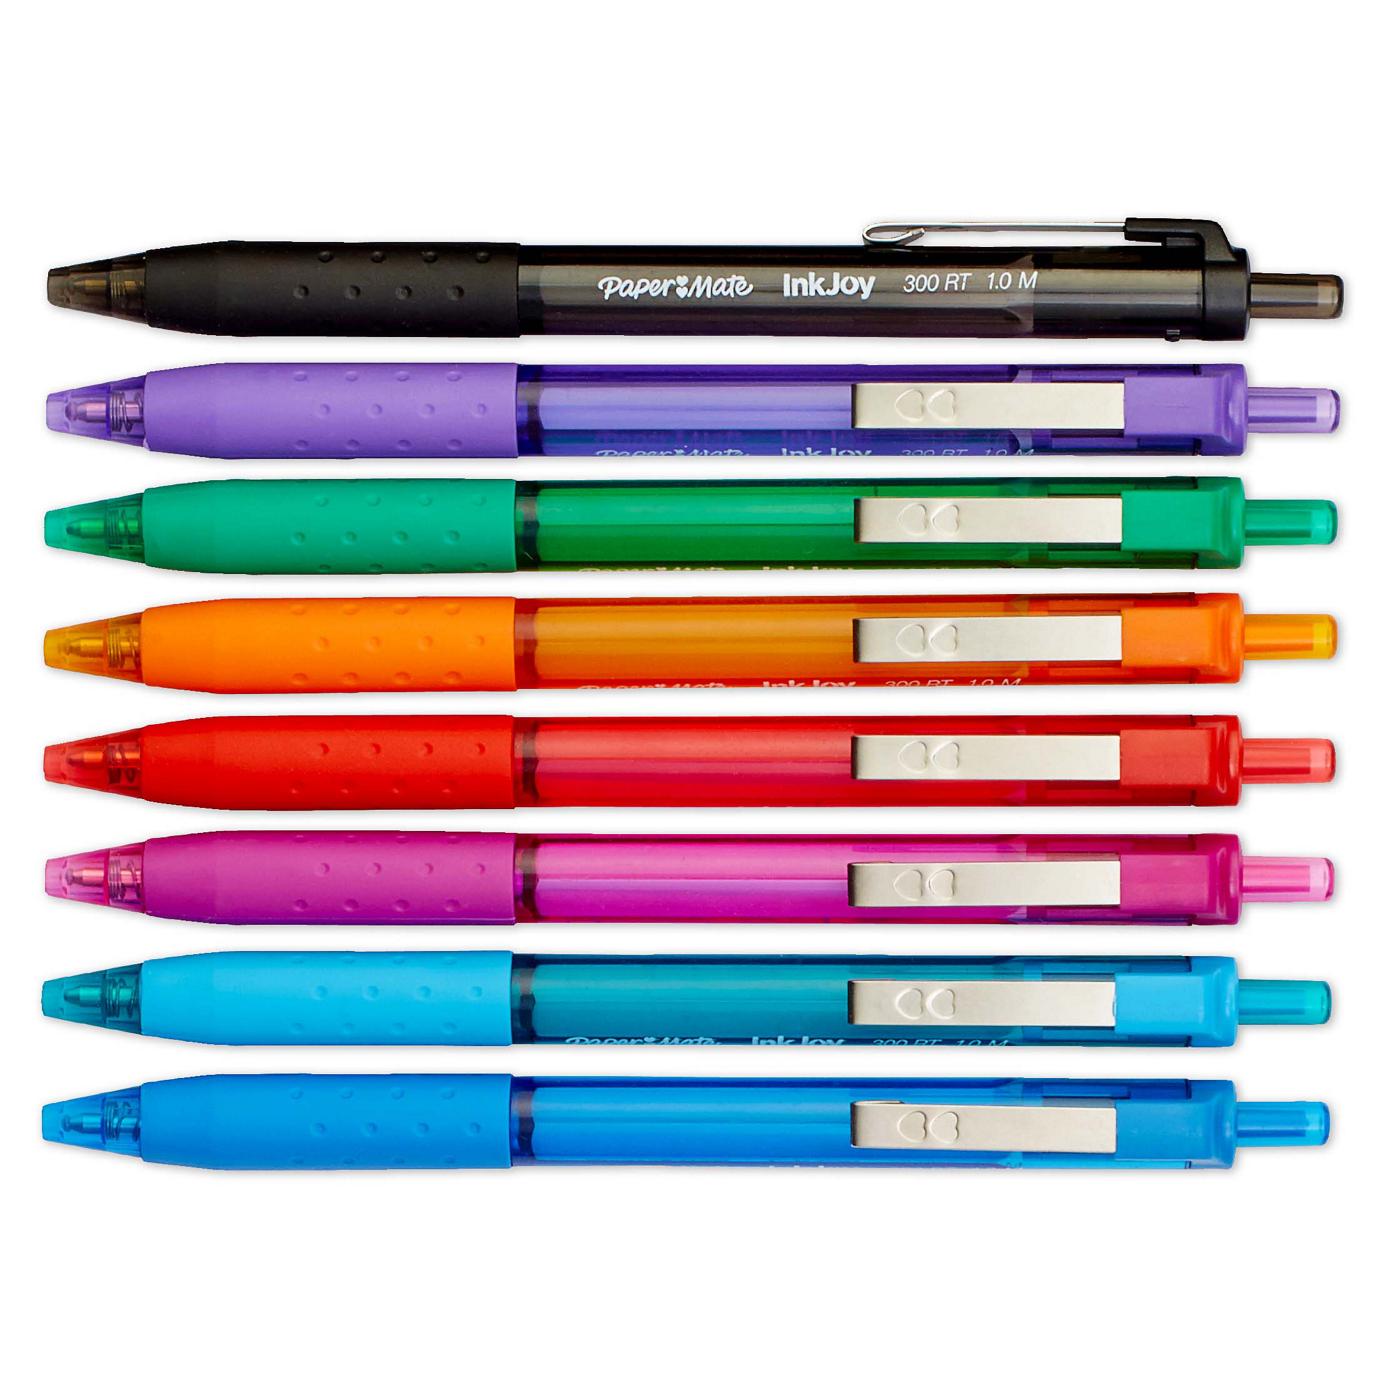 Paper Mate InkJoy 300RT 1.0mm Retractable Ballpoint Pens - Assorted Ink; image 2 of 2